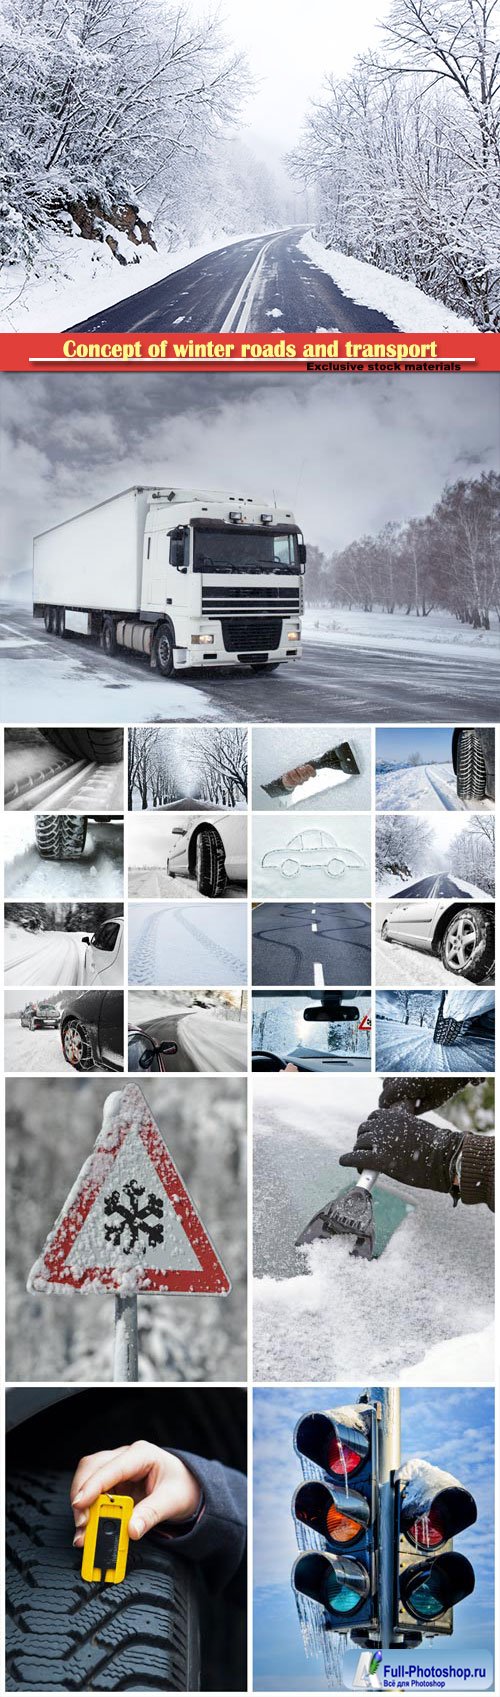 Concept of winter roads and transport